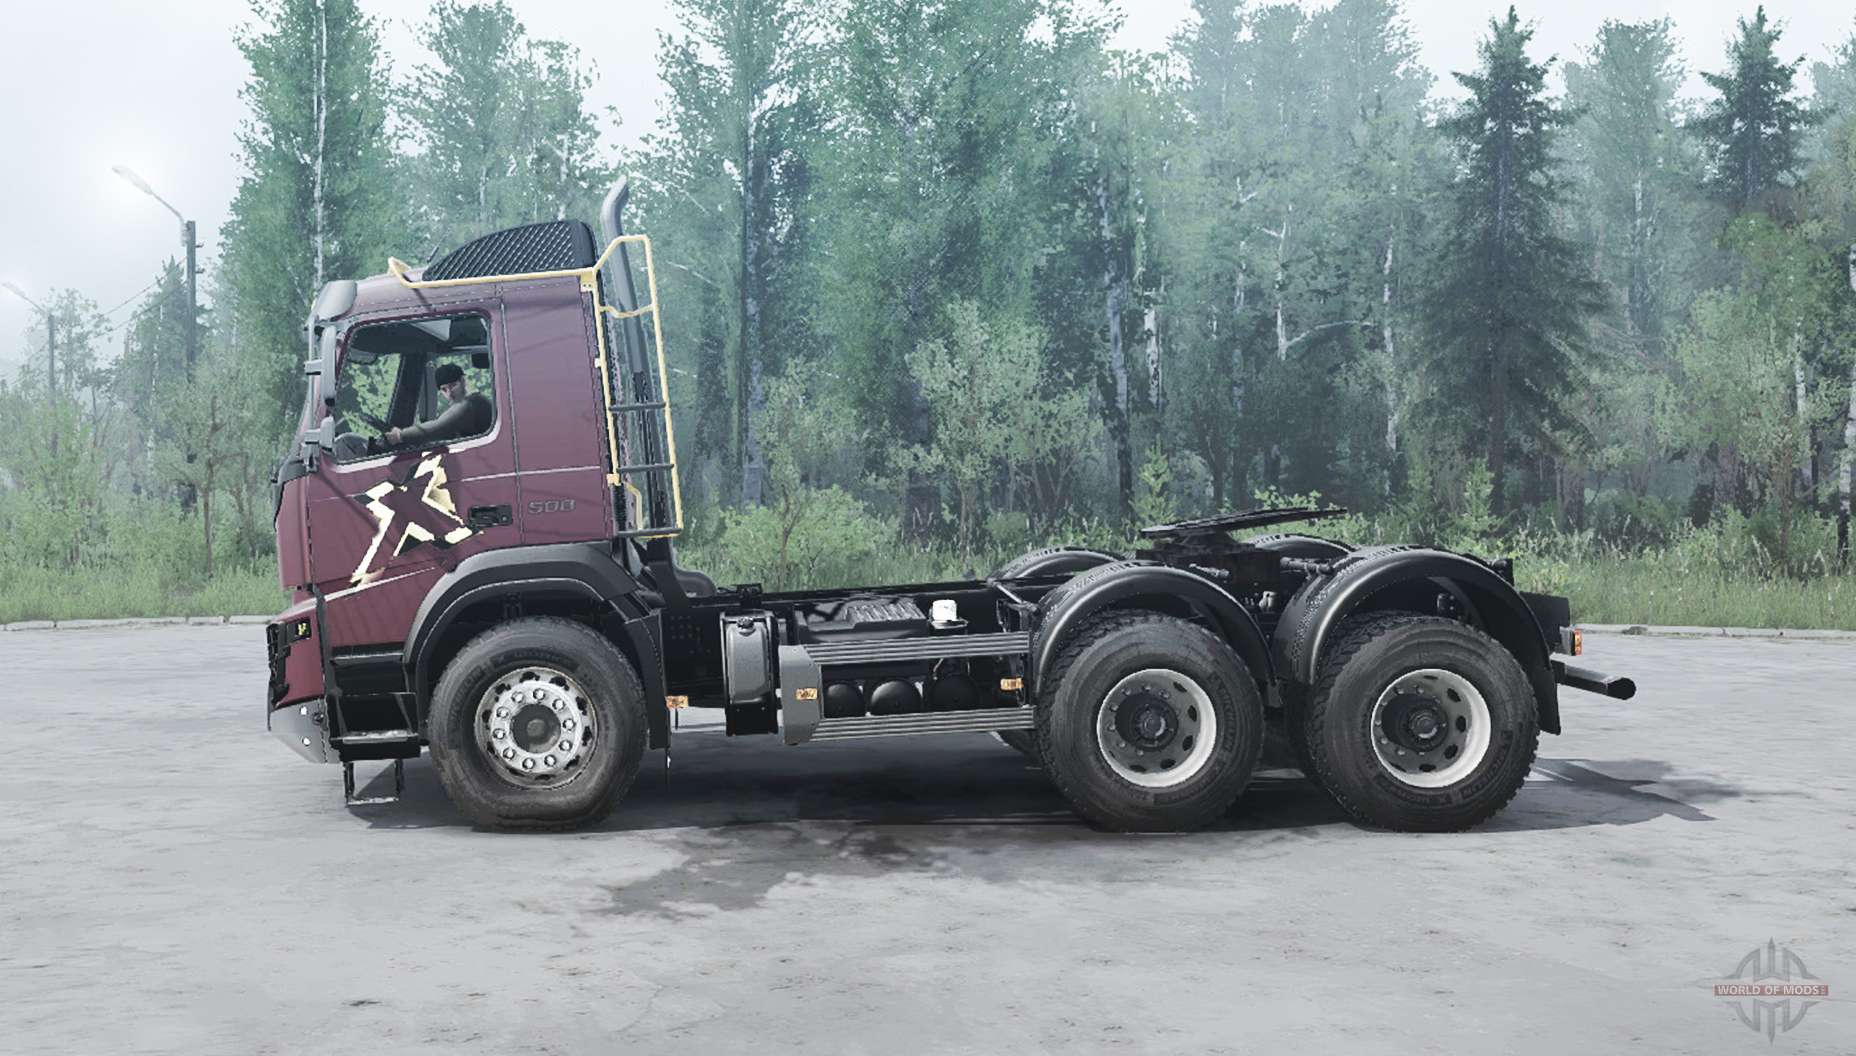 Volvo FMX 500 6x6 for Spin Tires